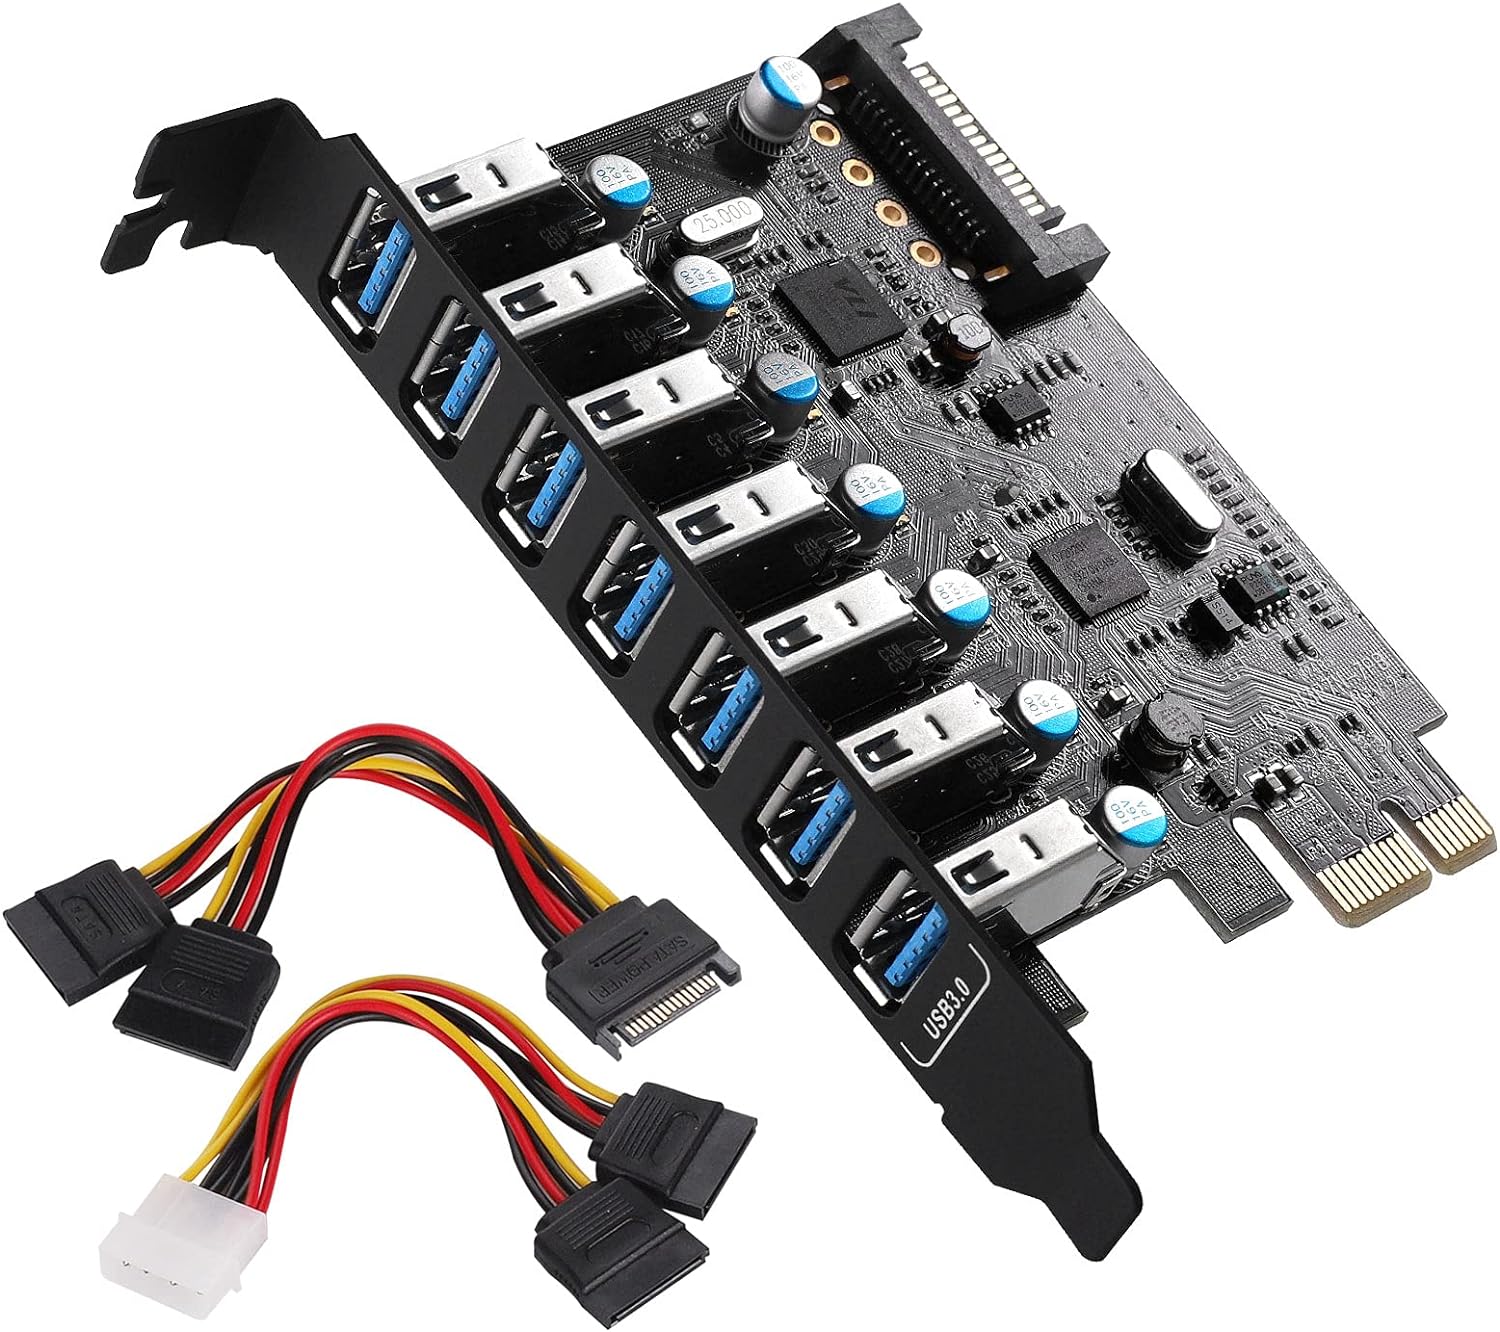 Inateck PCIe Card – Inateck Official